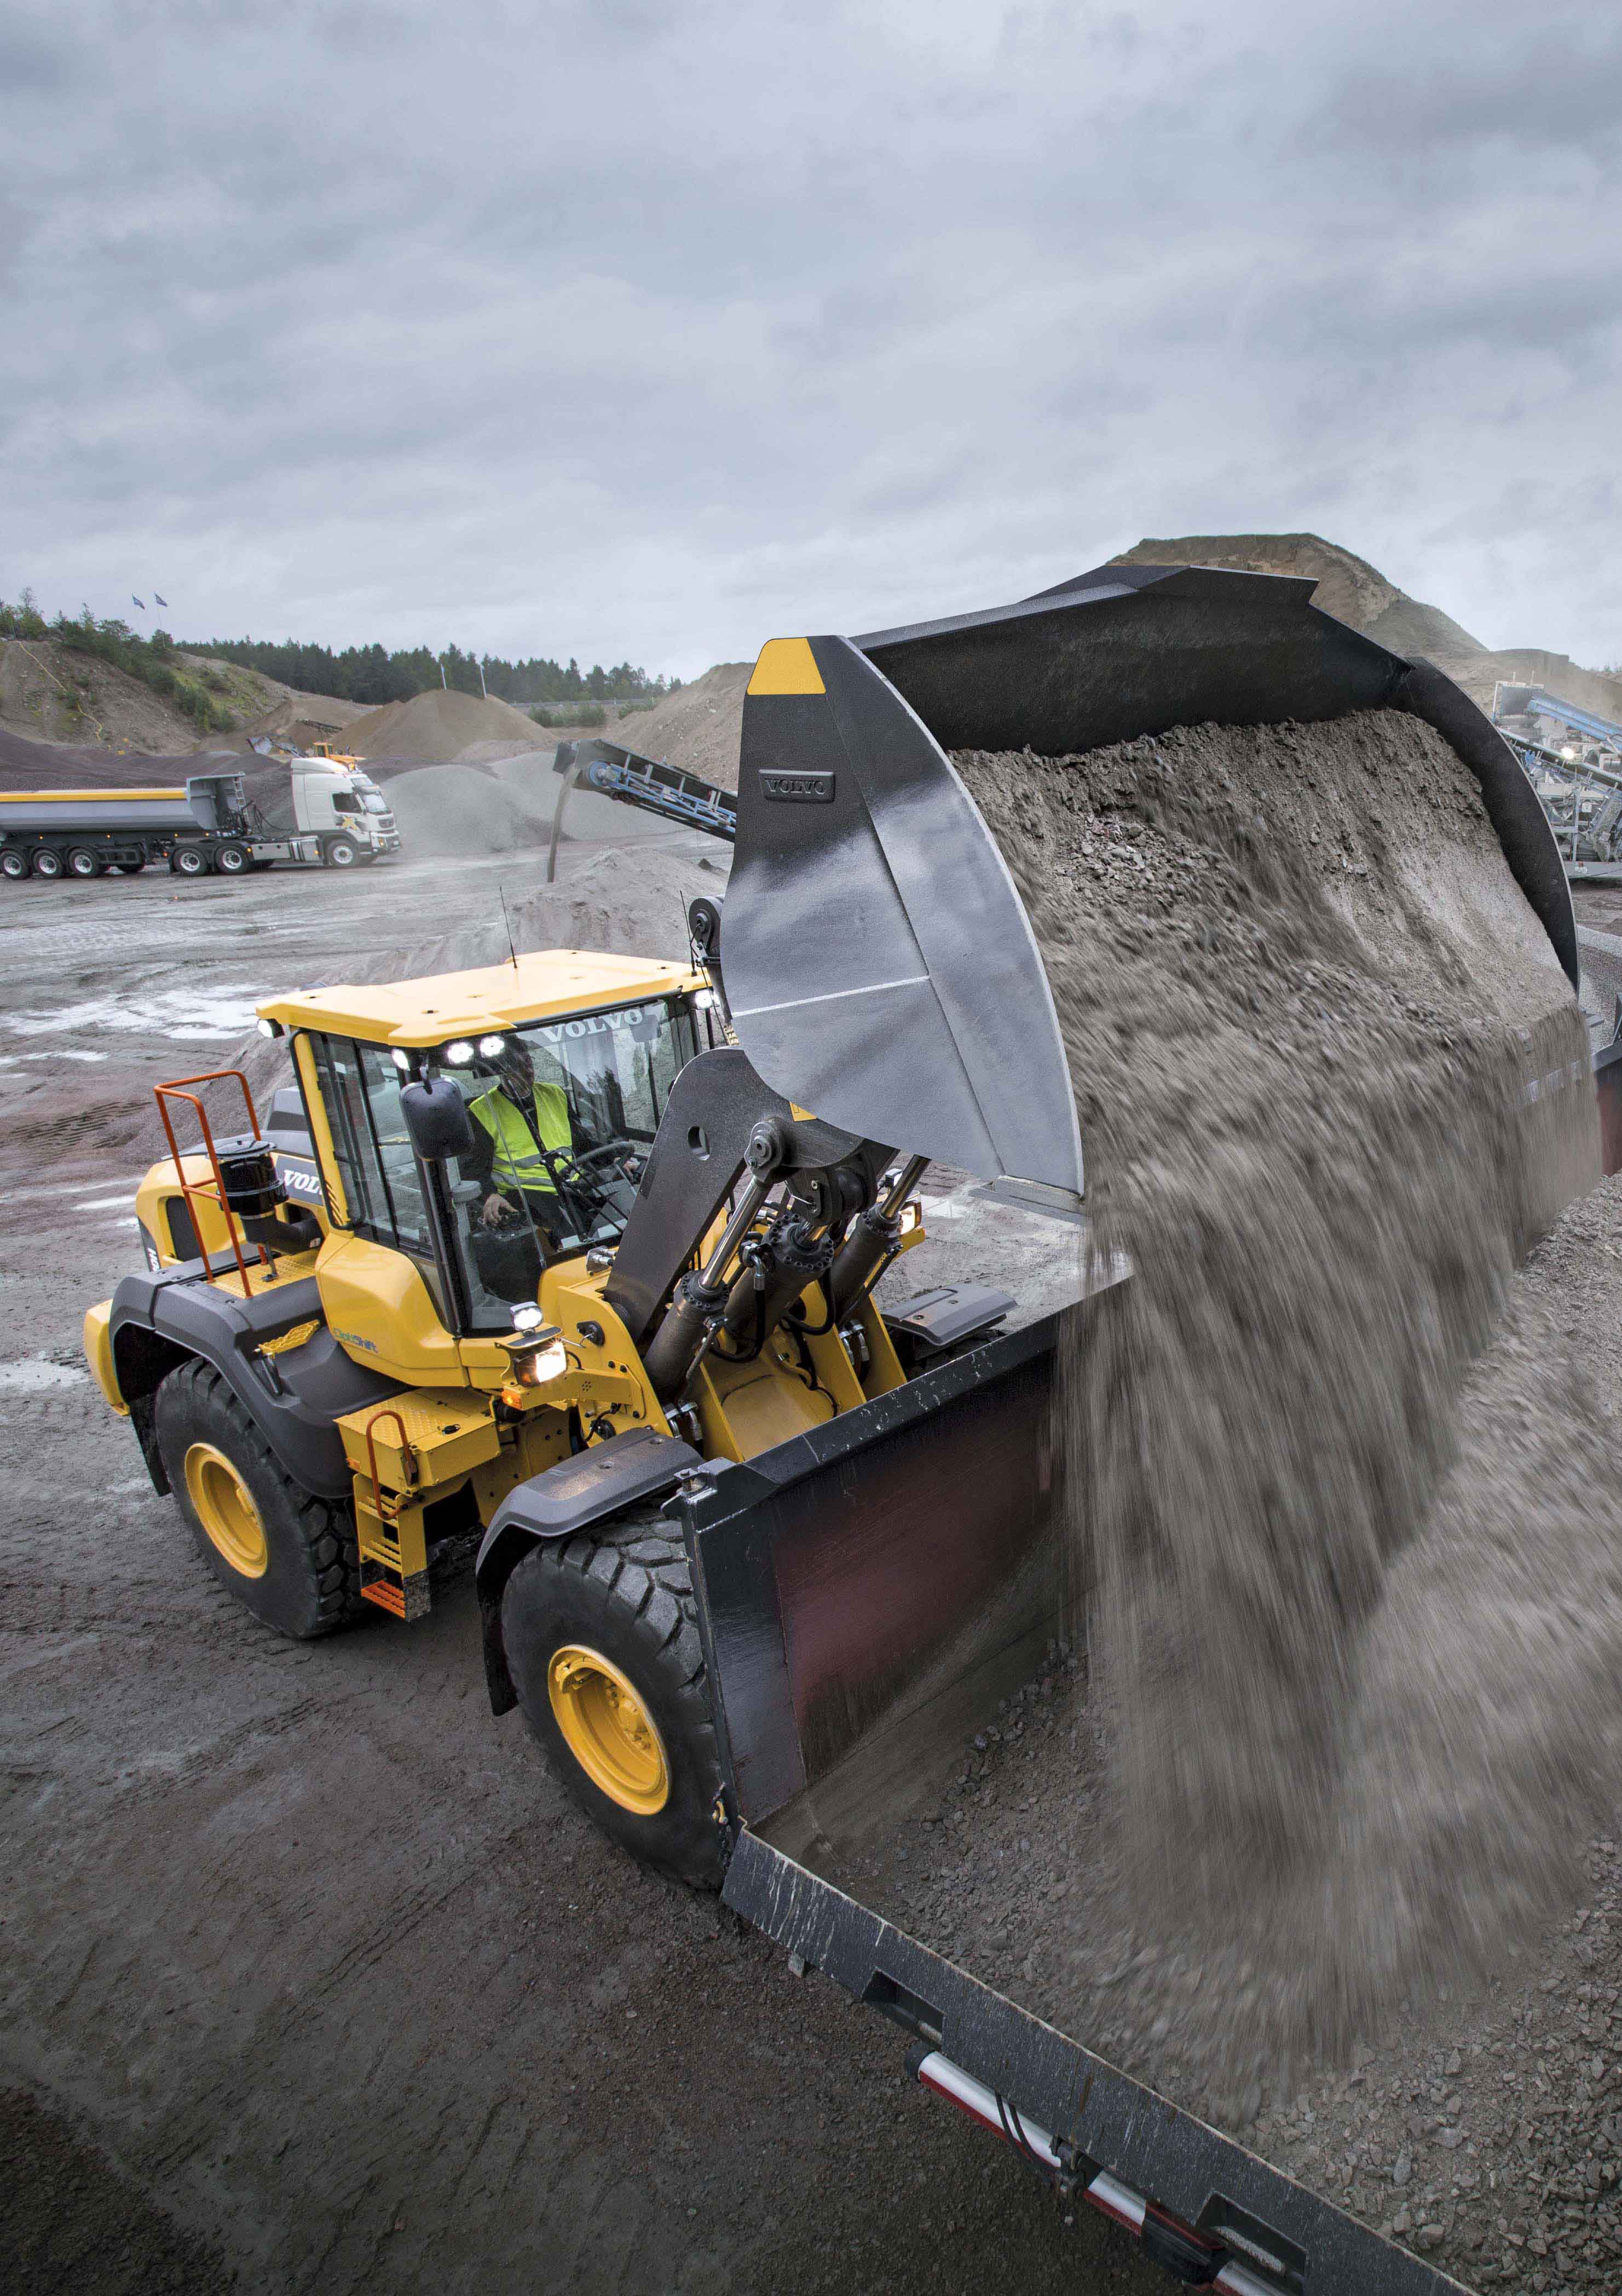 Volvo buckets for Volvo L110-L350 wheeled loaders